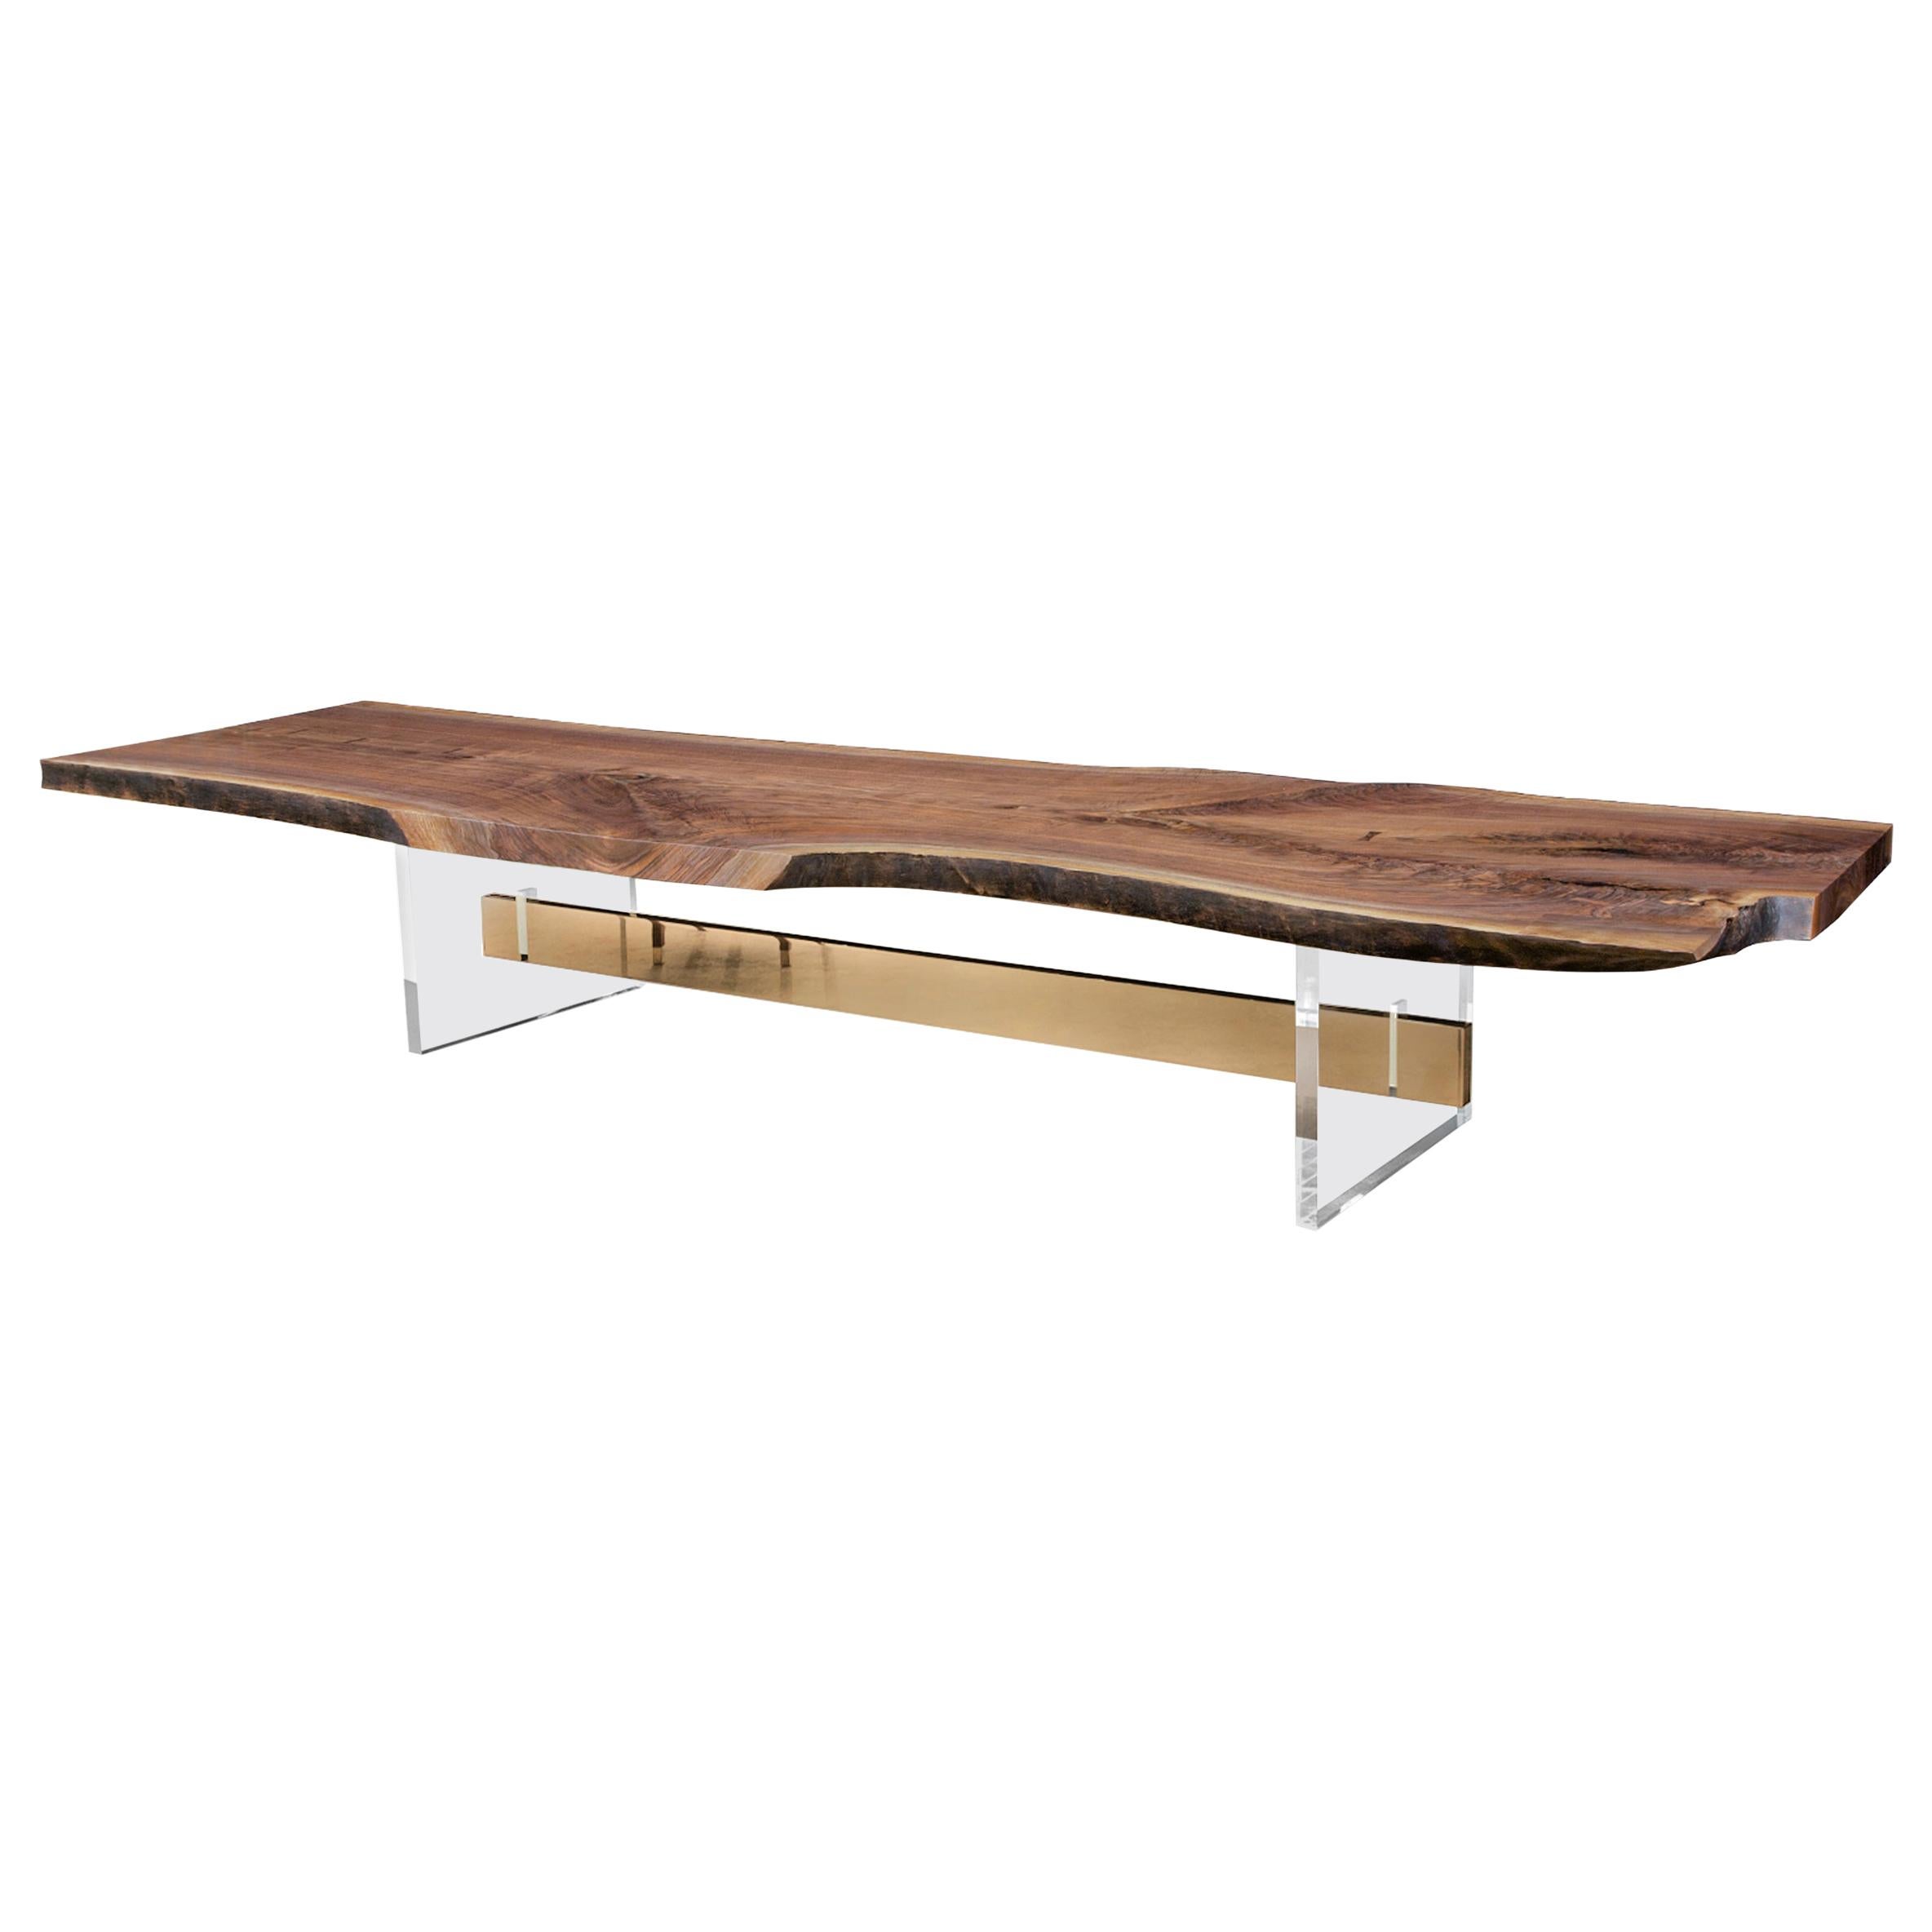 Hommes Dining Table:  Artful Combination of Bronze, Plexi and Wood